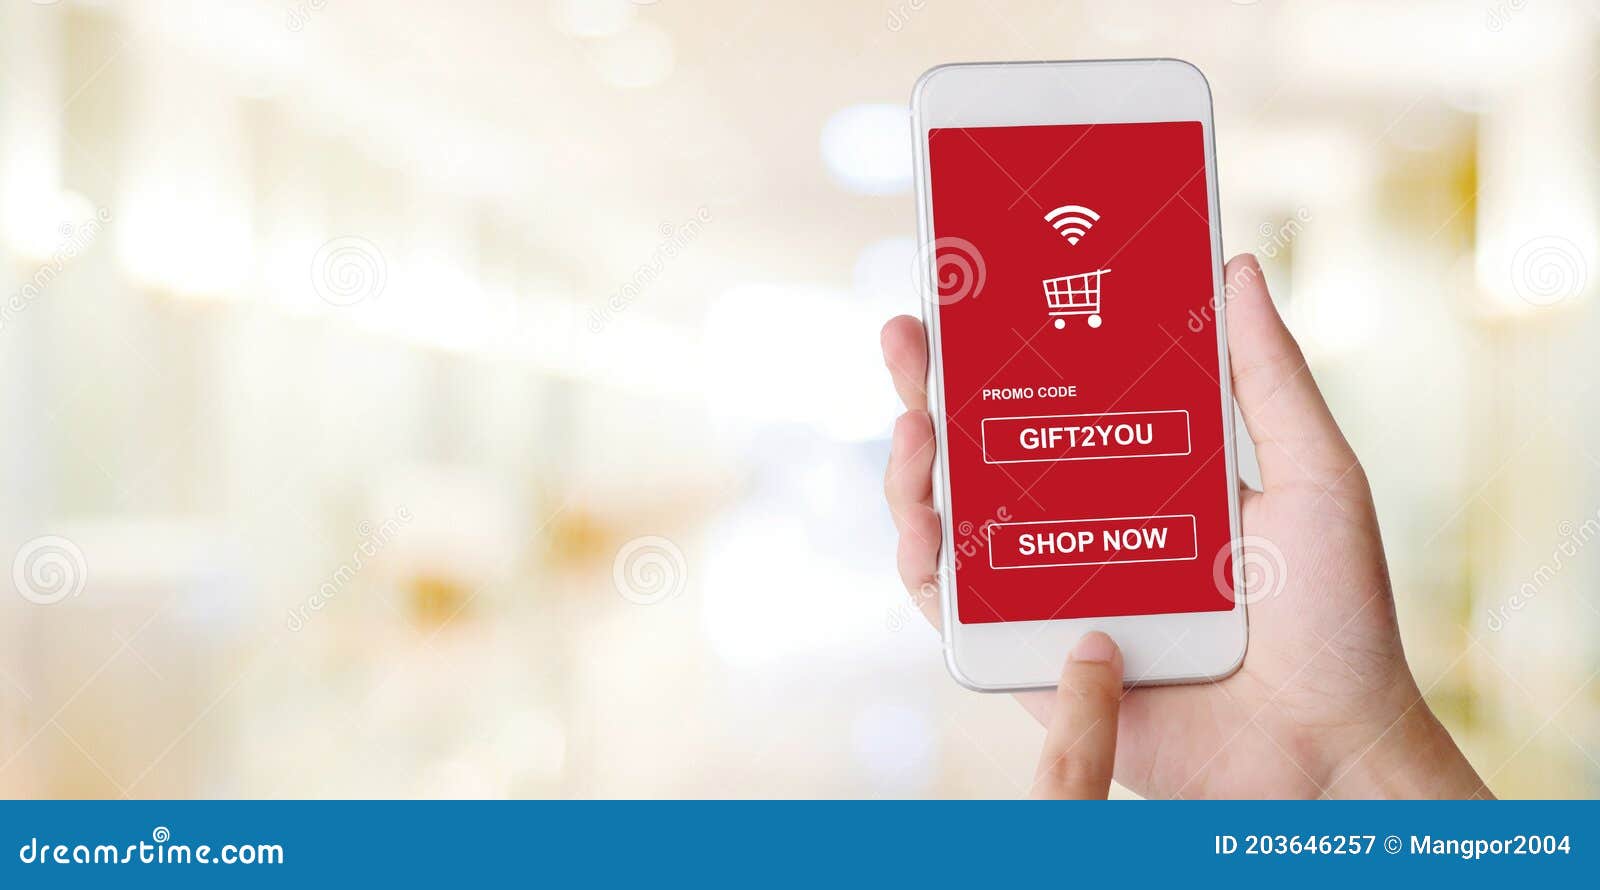 Promo Code on Mobile Phone Screen for Shopping Online Discount, Hand  Holding Smartphone To Get Sale Voucher Over Blur Store Stock Image - Image  of marketing, offer: 203646257